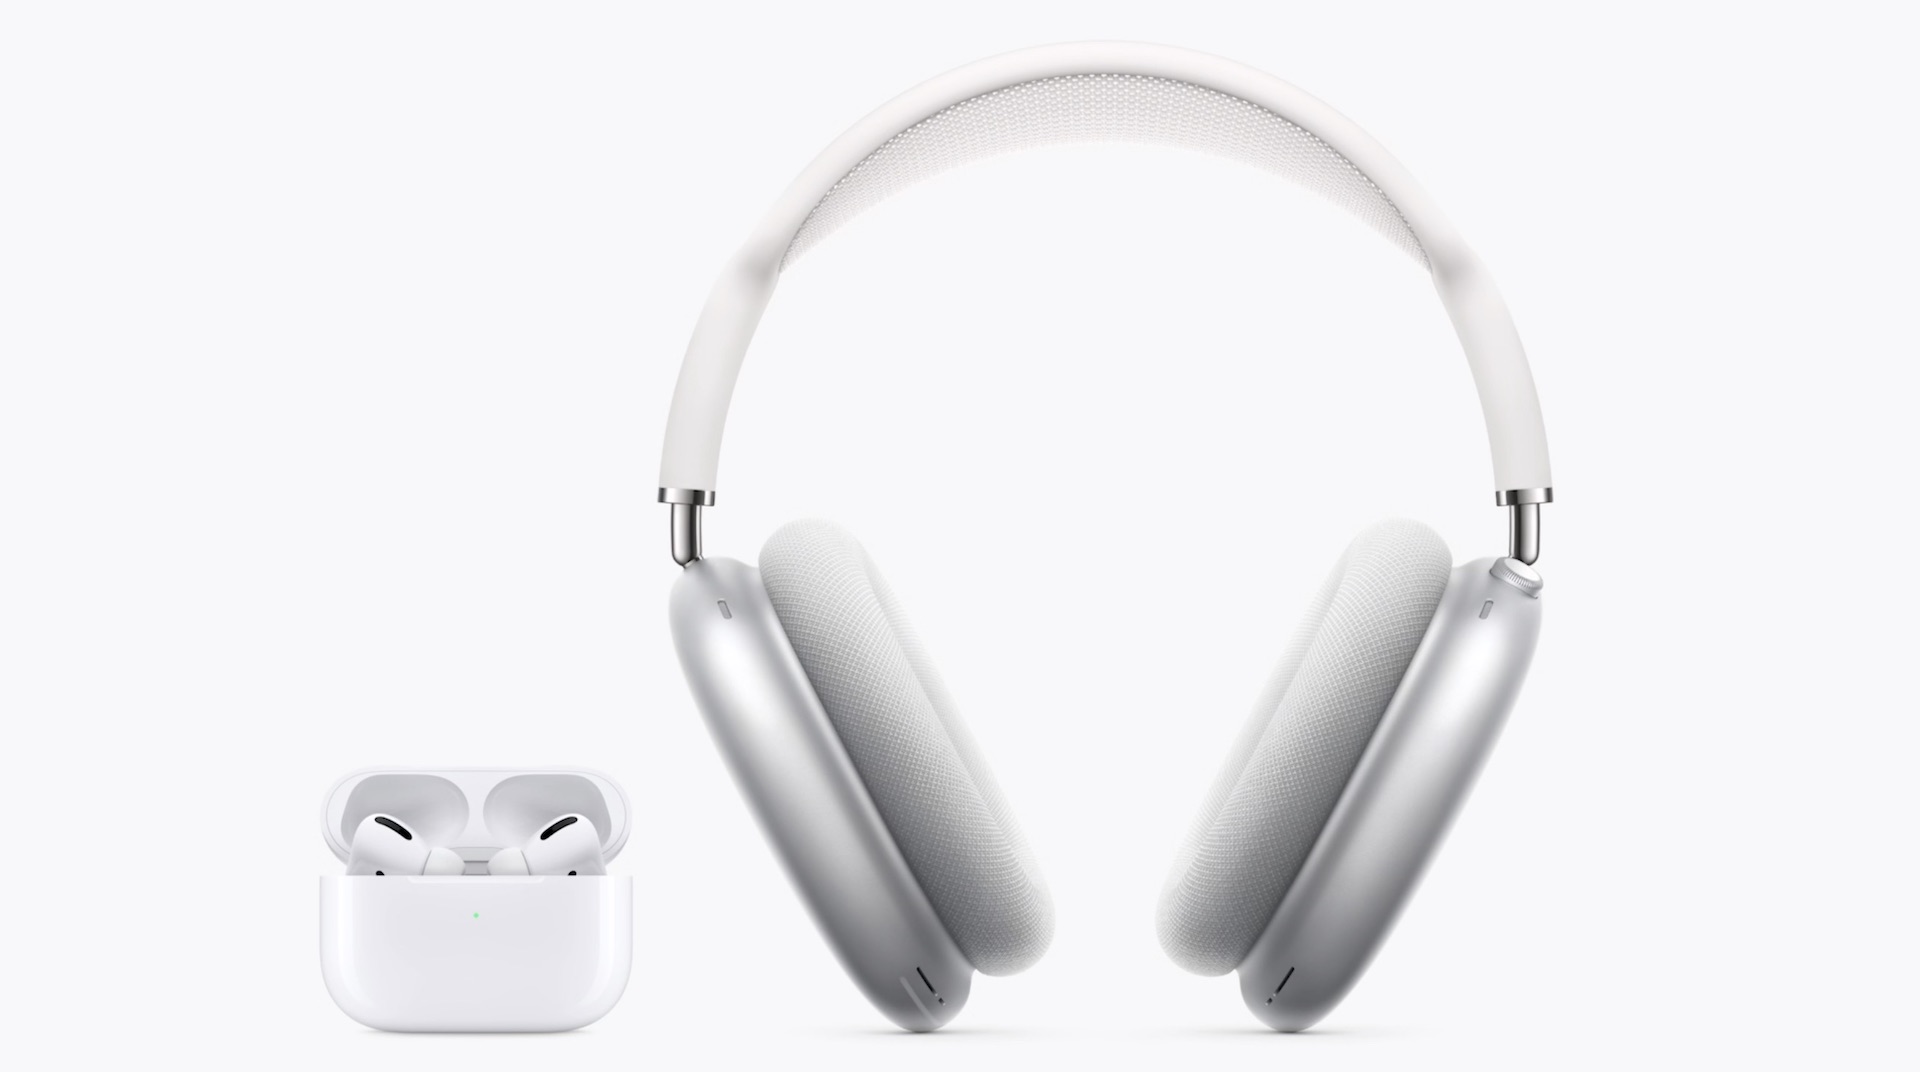 tvos-and-macos-to-get-spatial-audio-support-for-airpods-pro-and-max